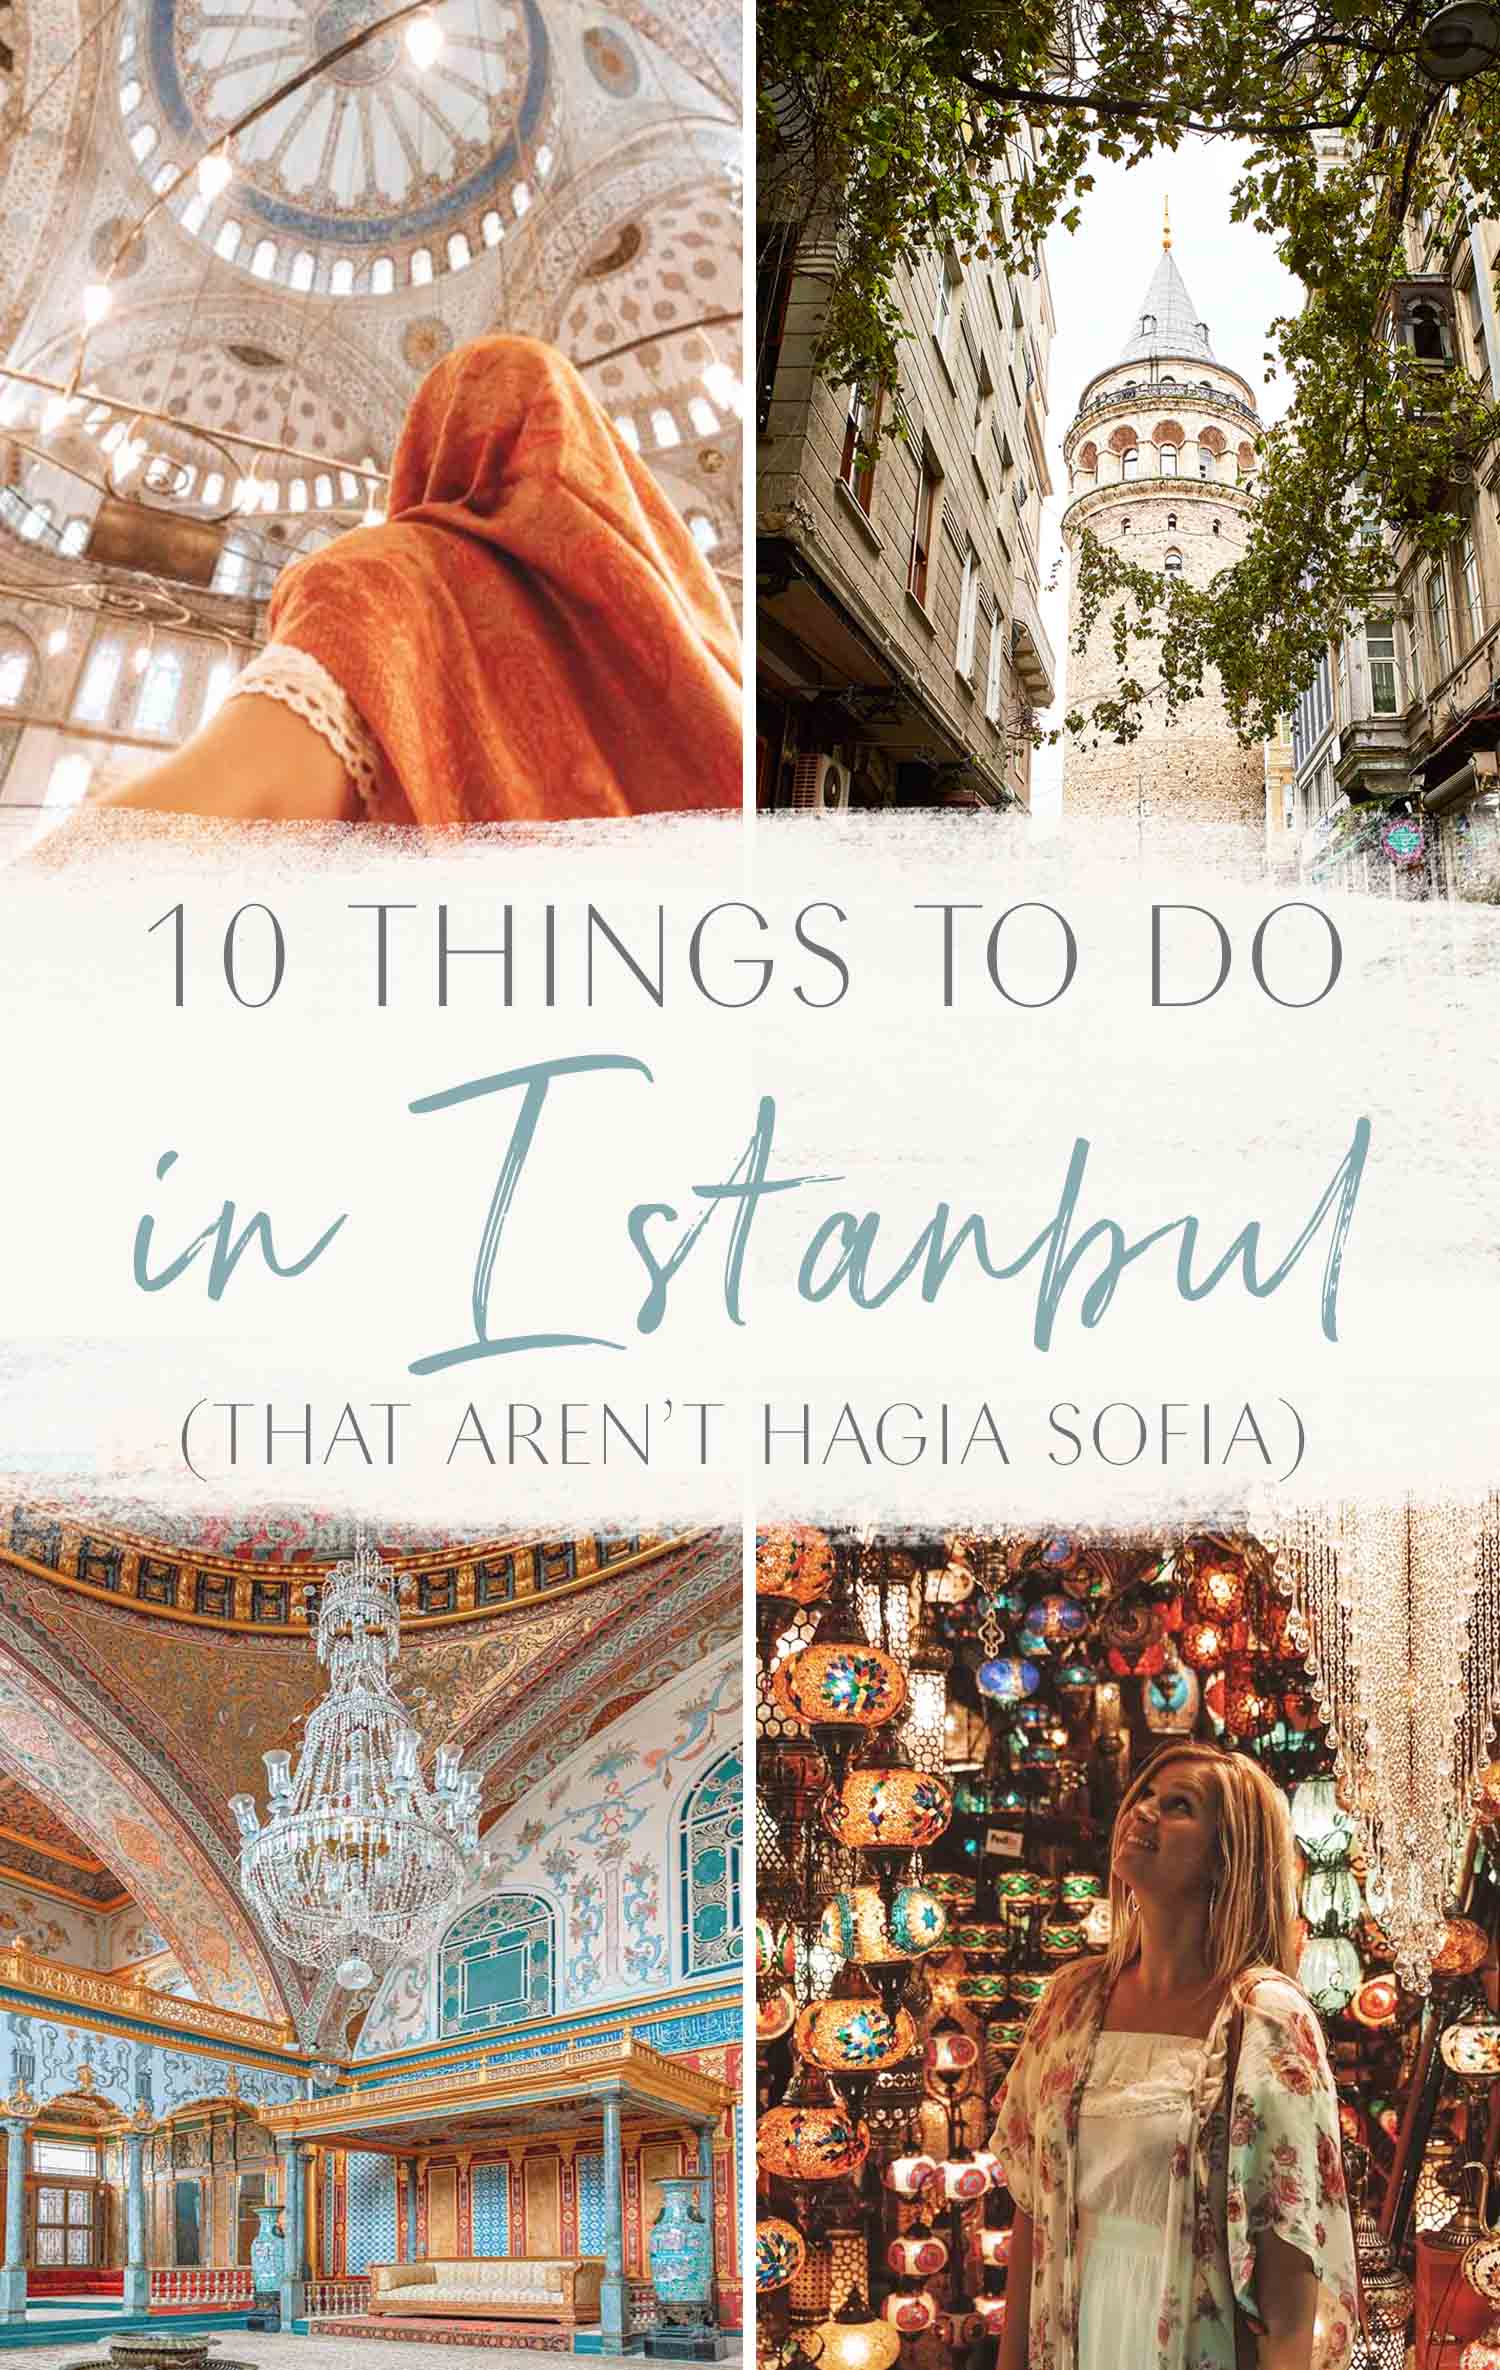 10 Things to Do in Instanbul